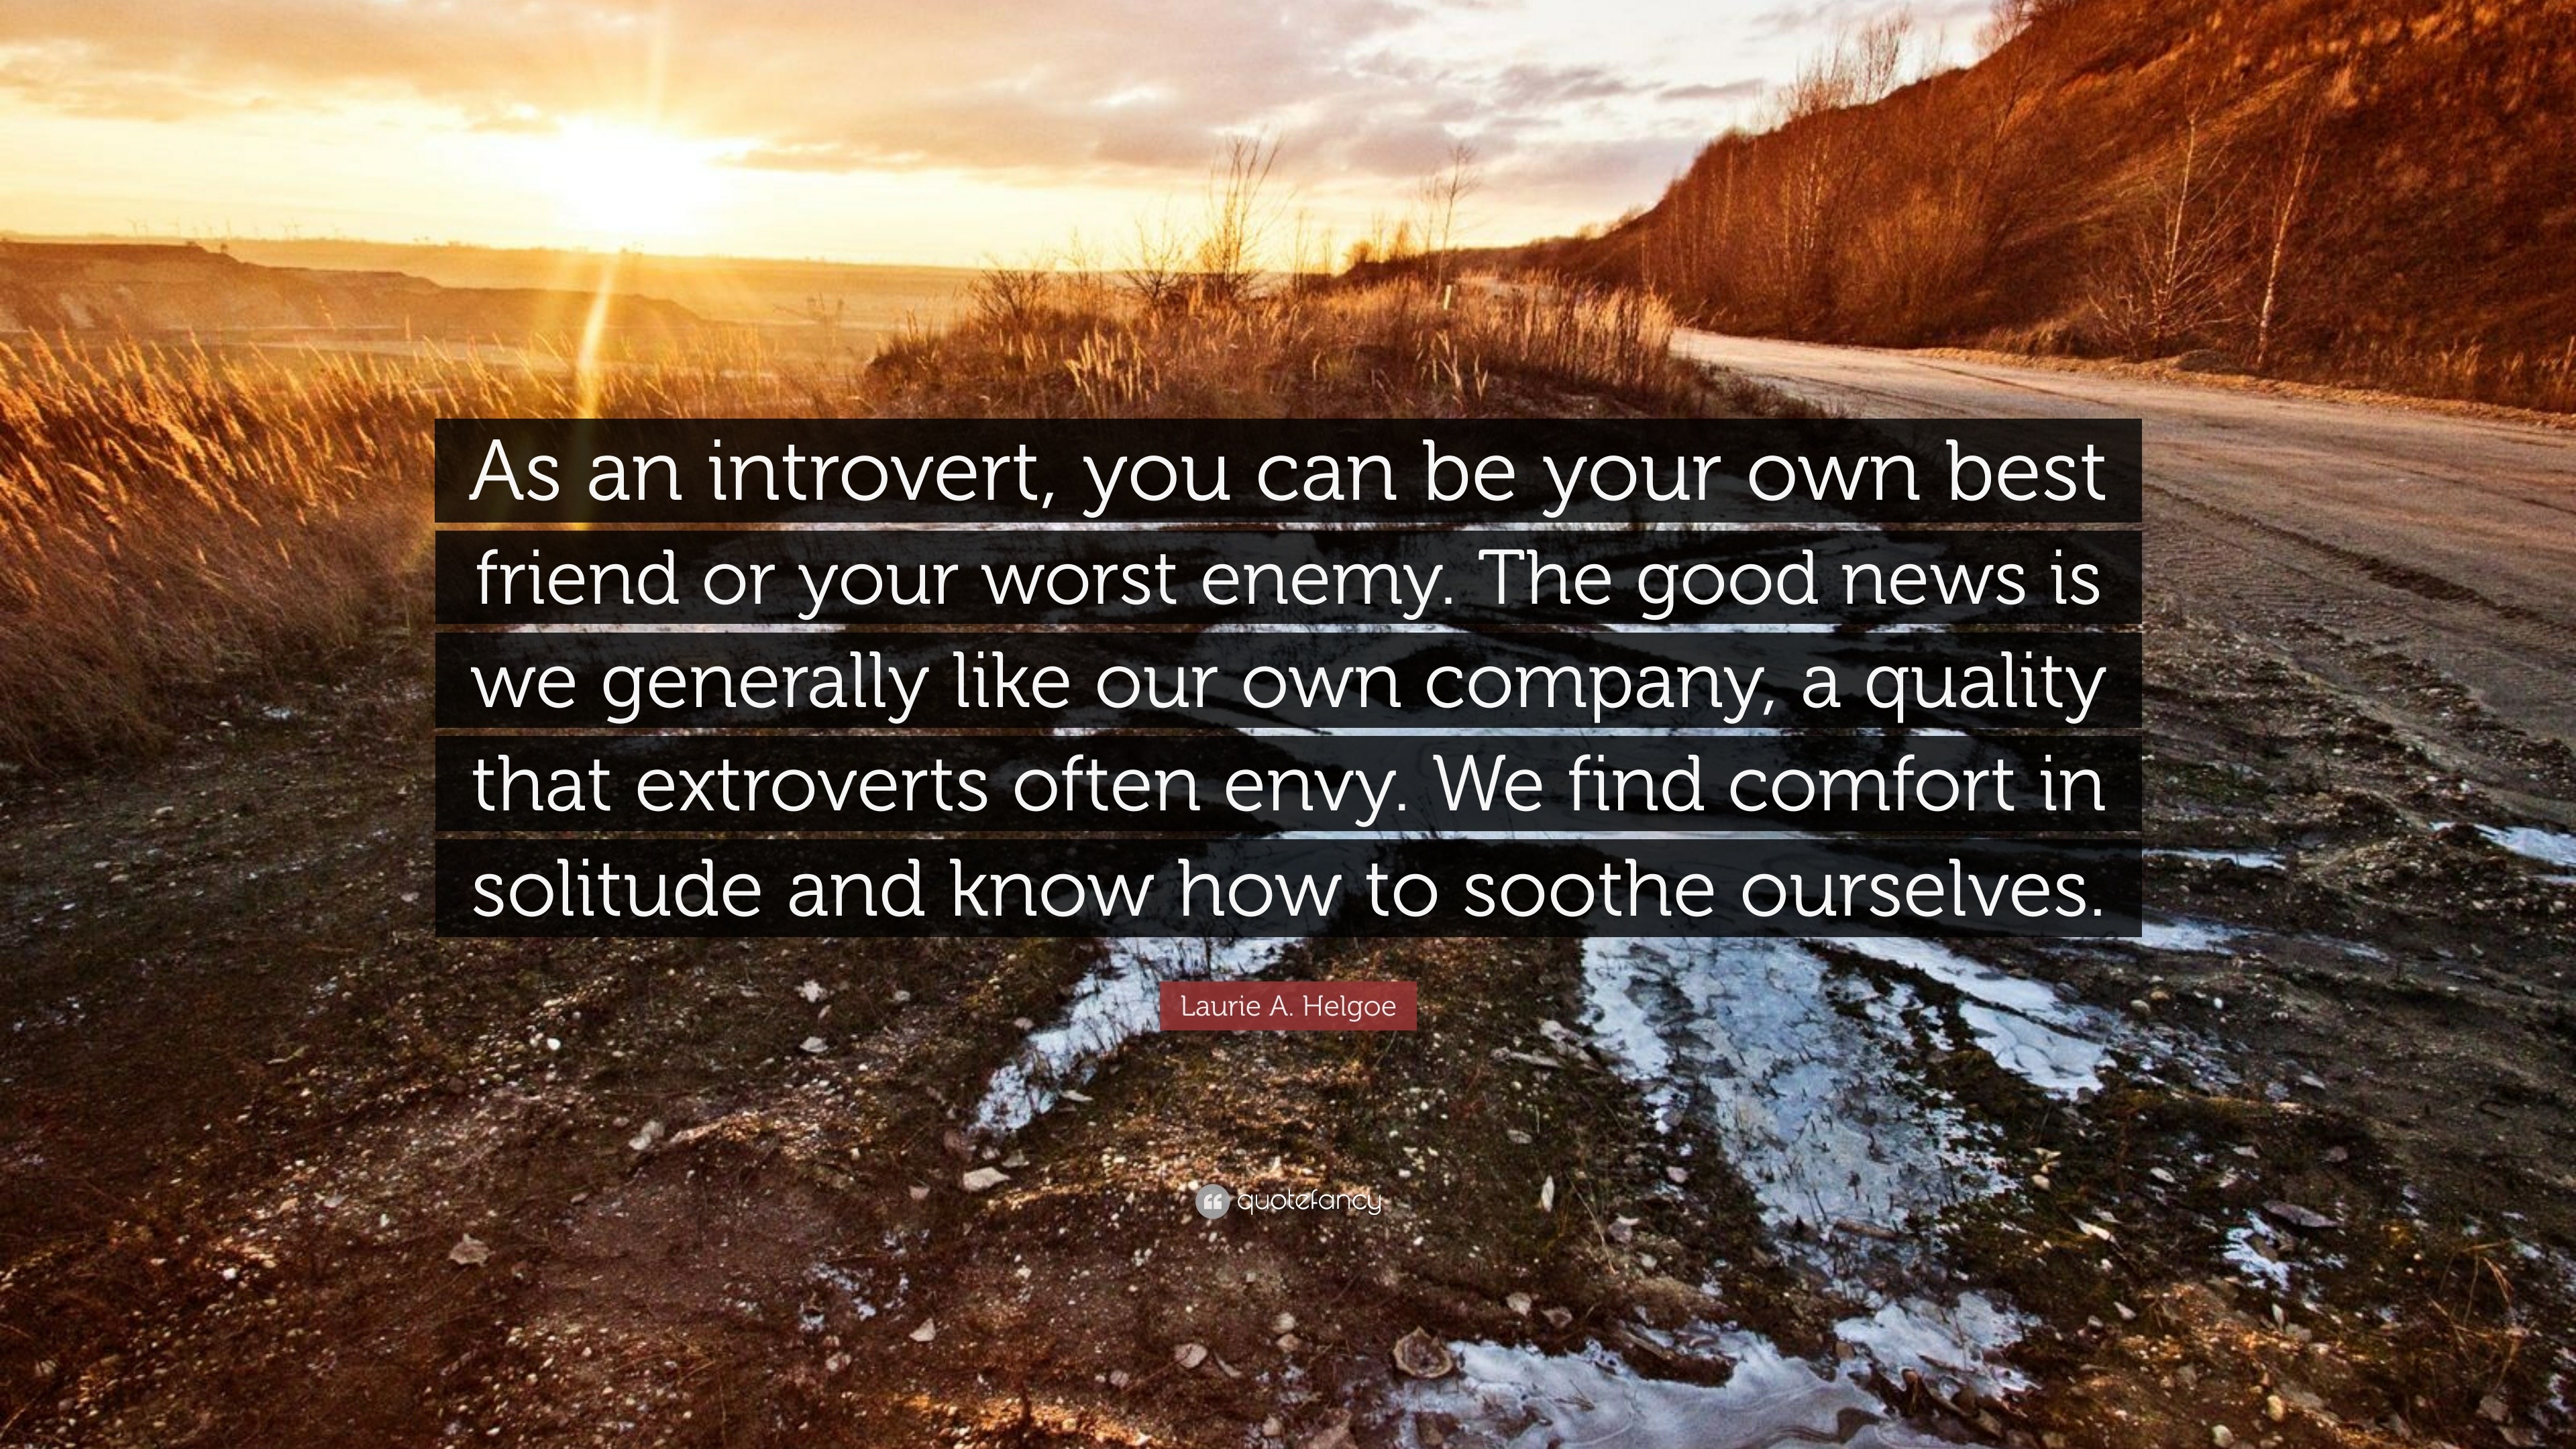 Laurie A Helgoe Quote As An Introvert You Can Be Your Own Best Friend Or Your Worst Enemy The Good News Is We Generally Like Our Own Company